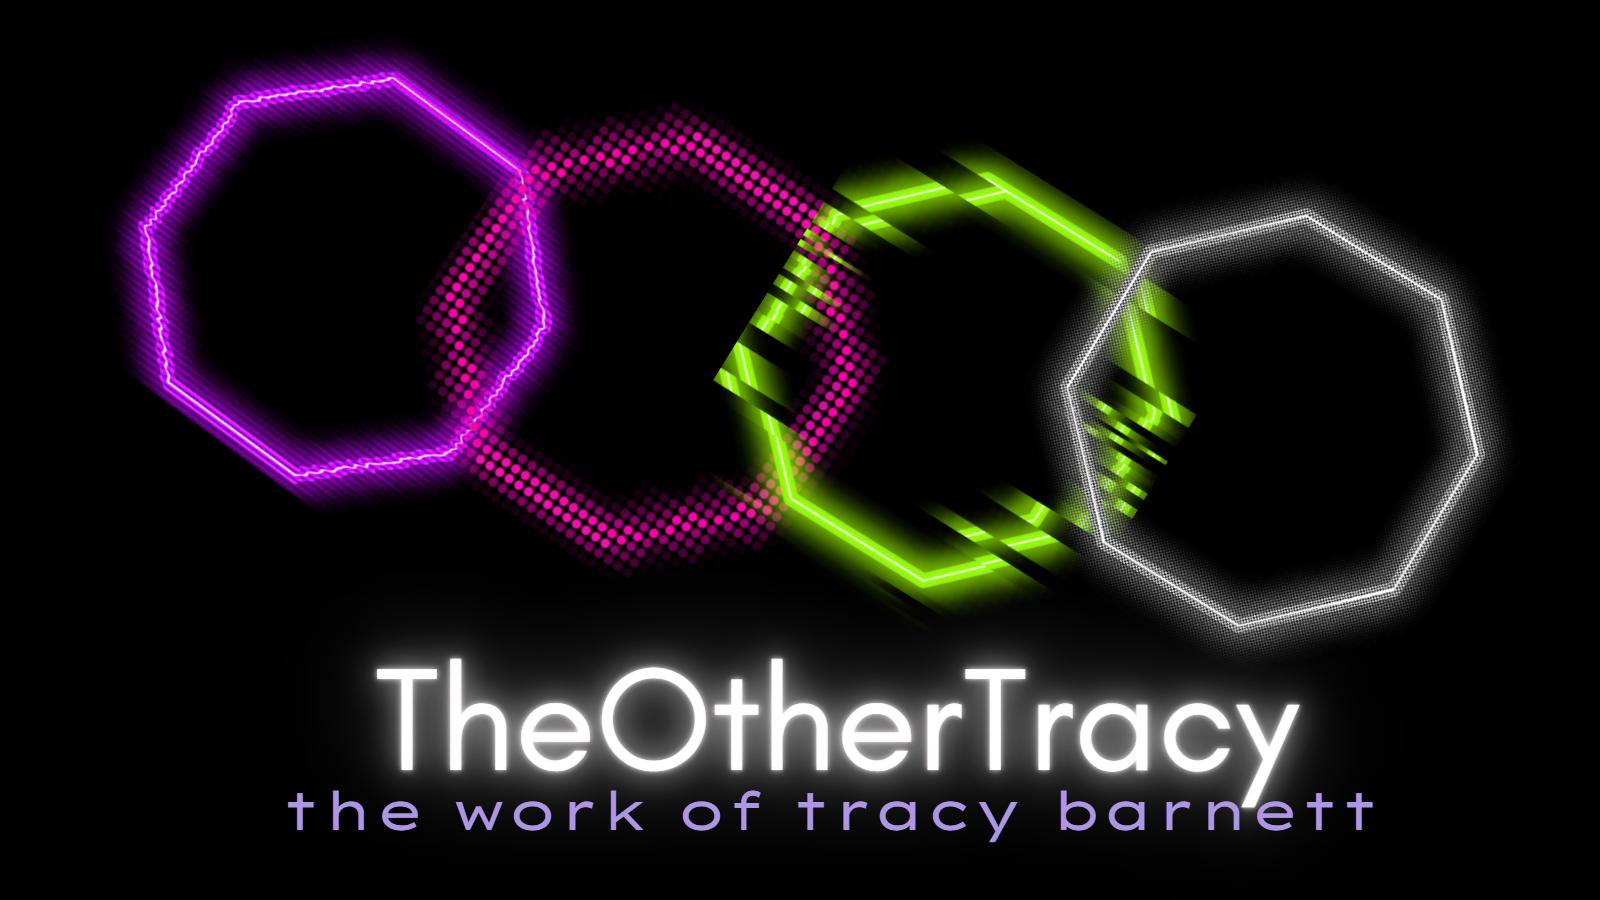 TheOtherTracy<br />
the work of Tracy Barnett